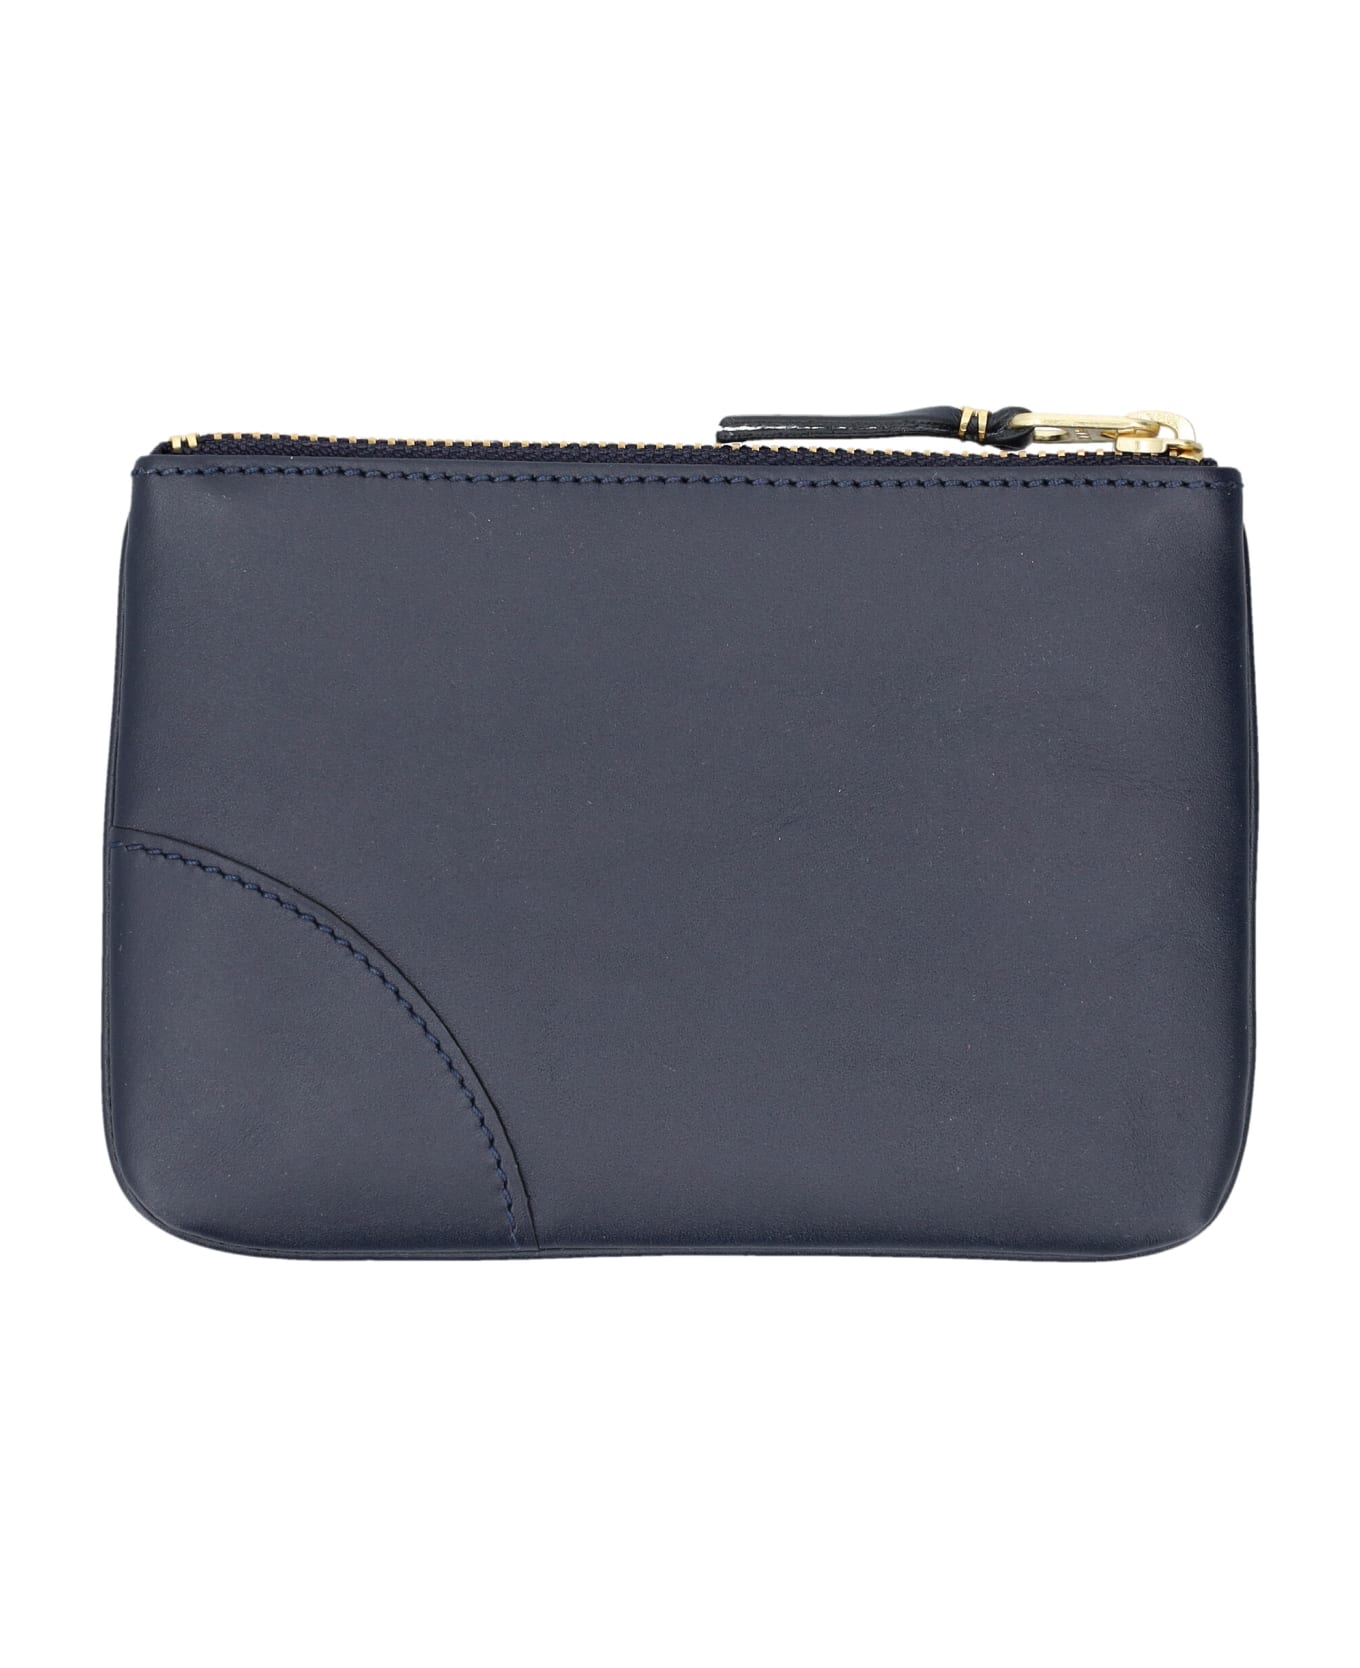 Comme des Garçons Wallet Xsmall Classic Leather Pouch - NAVY バッグ